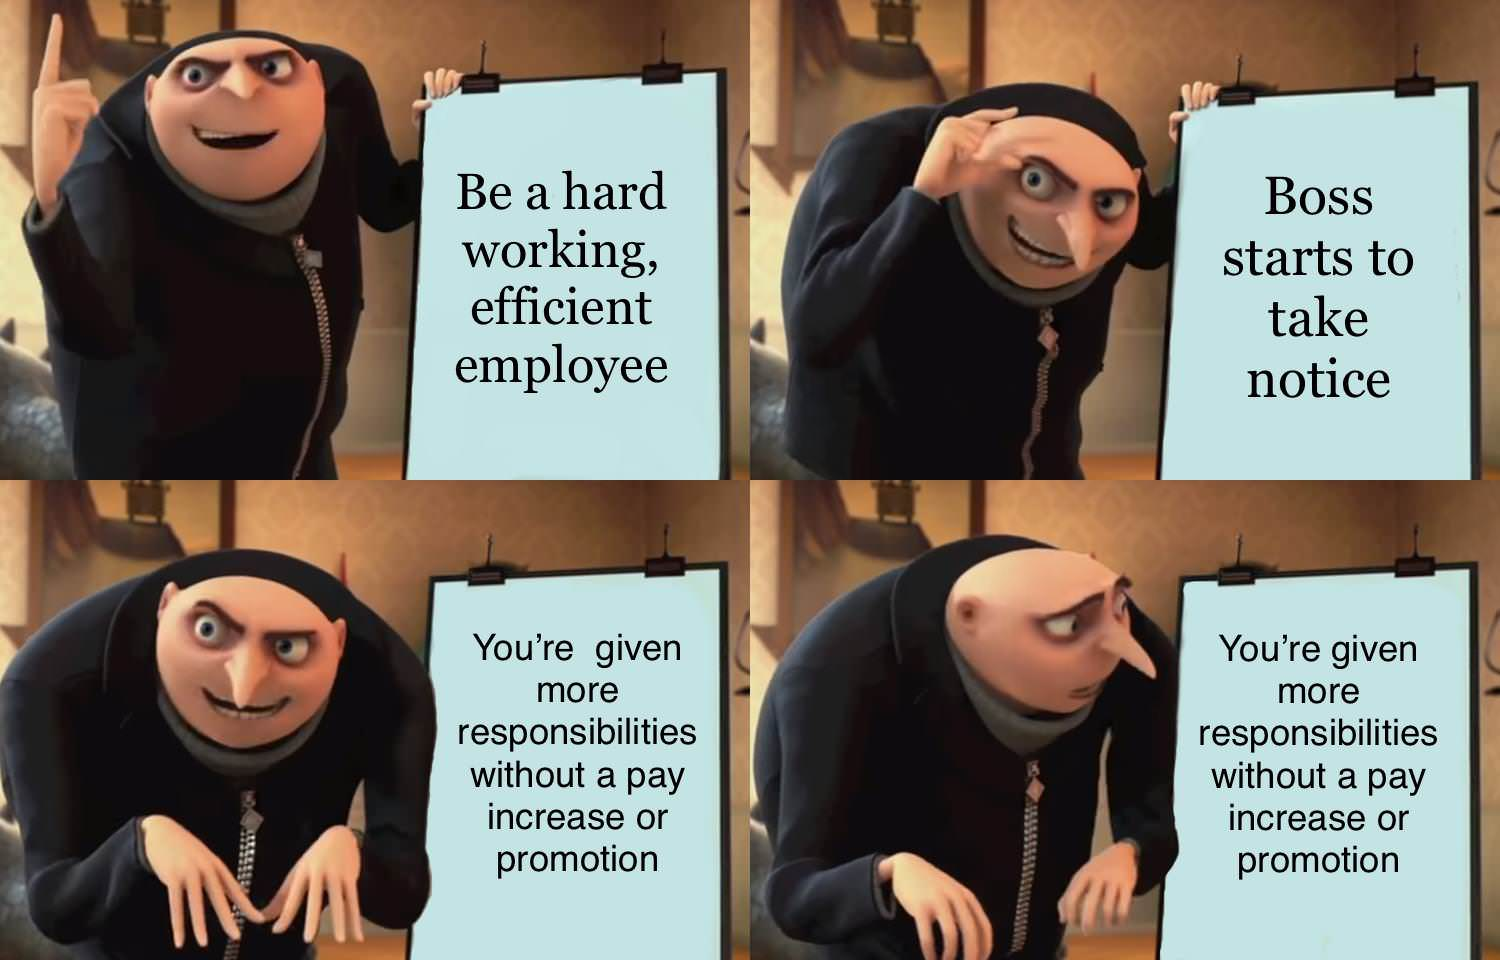 cookie run memes - Be a hard working, efficient employee Boss starts to take notice You're given more responsibilities without a pay increase or promotion You're given more responsibilities without a pay increase or promotion